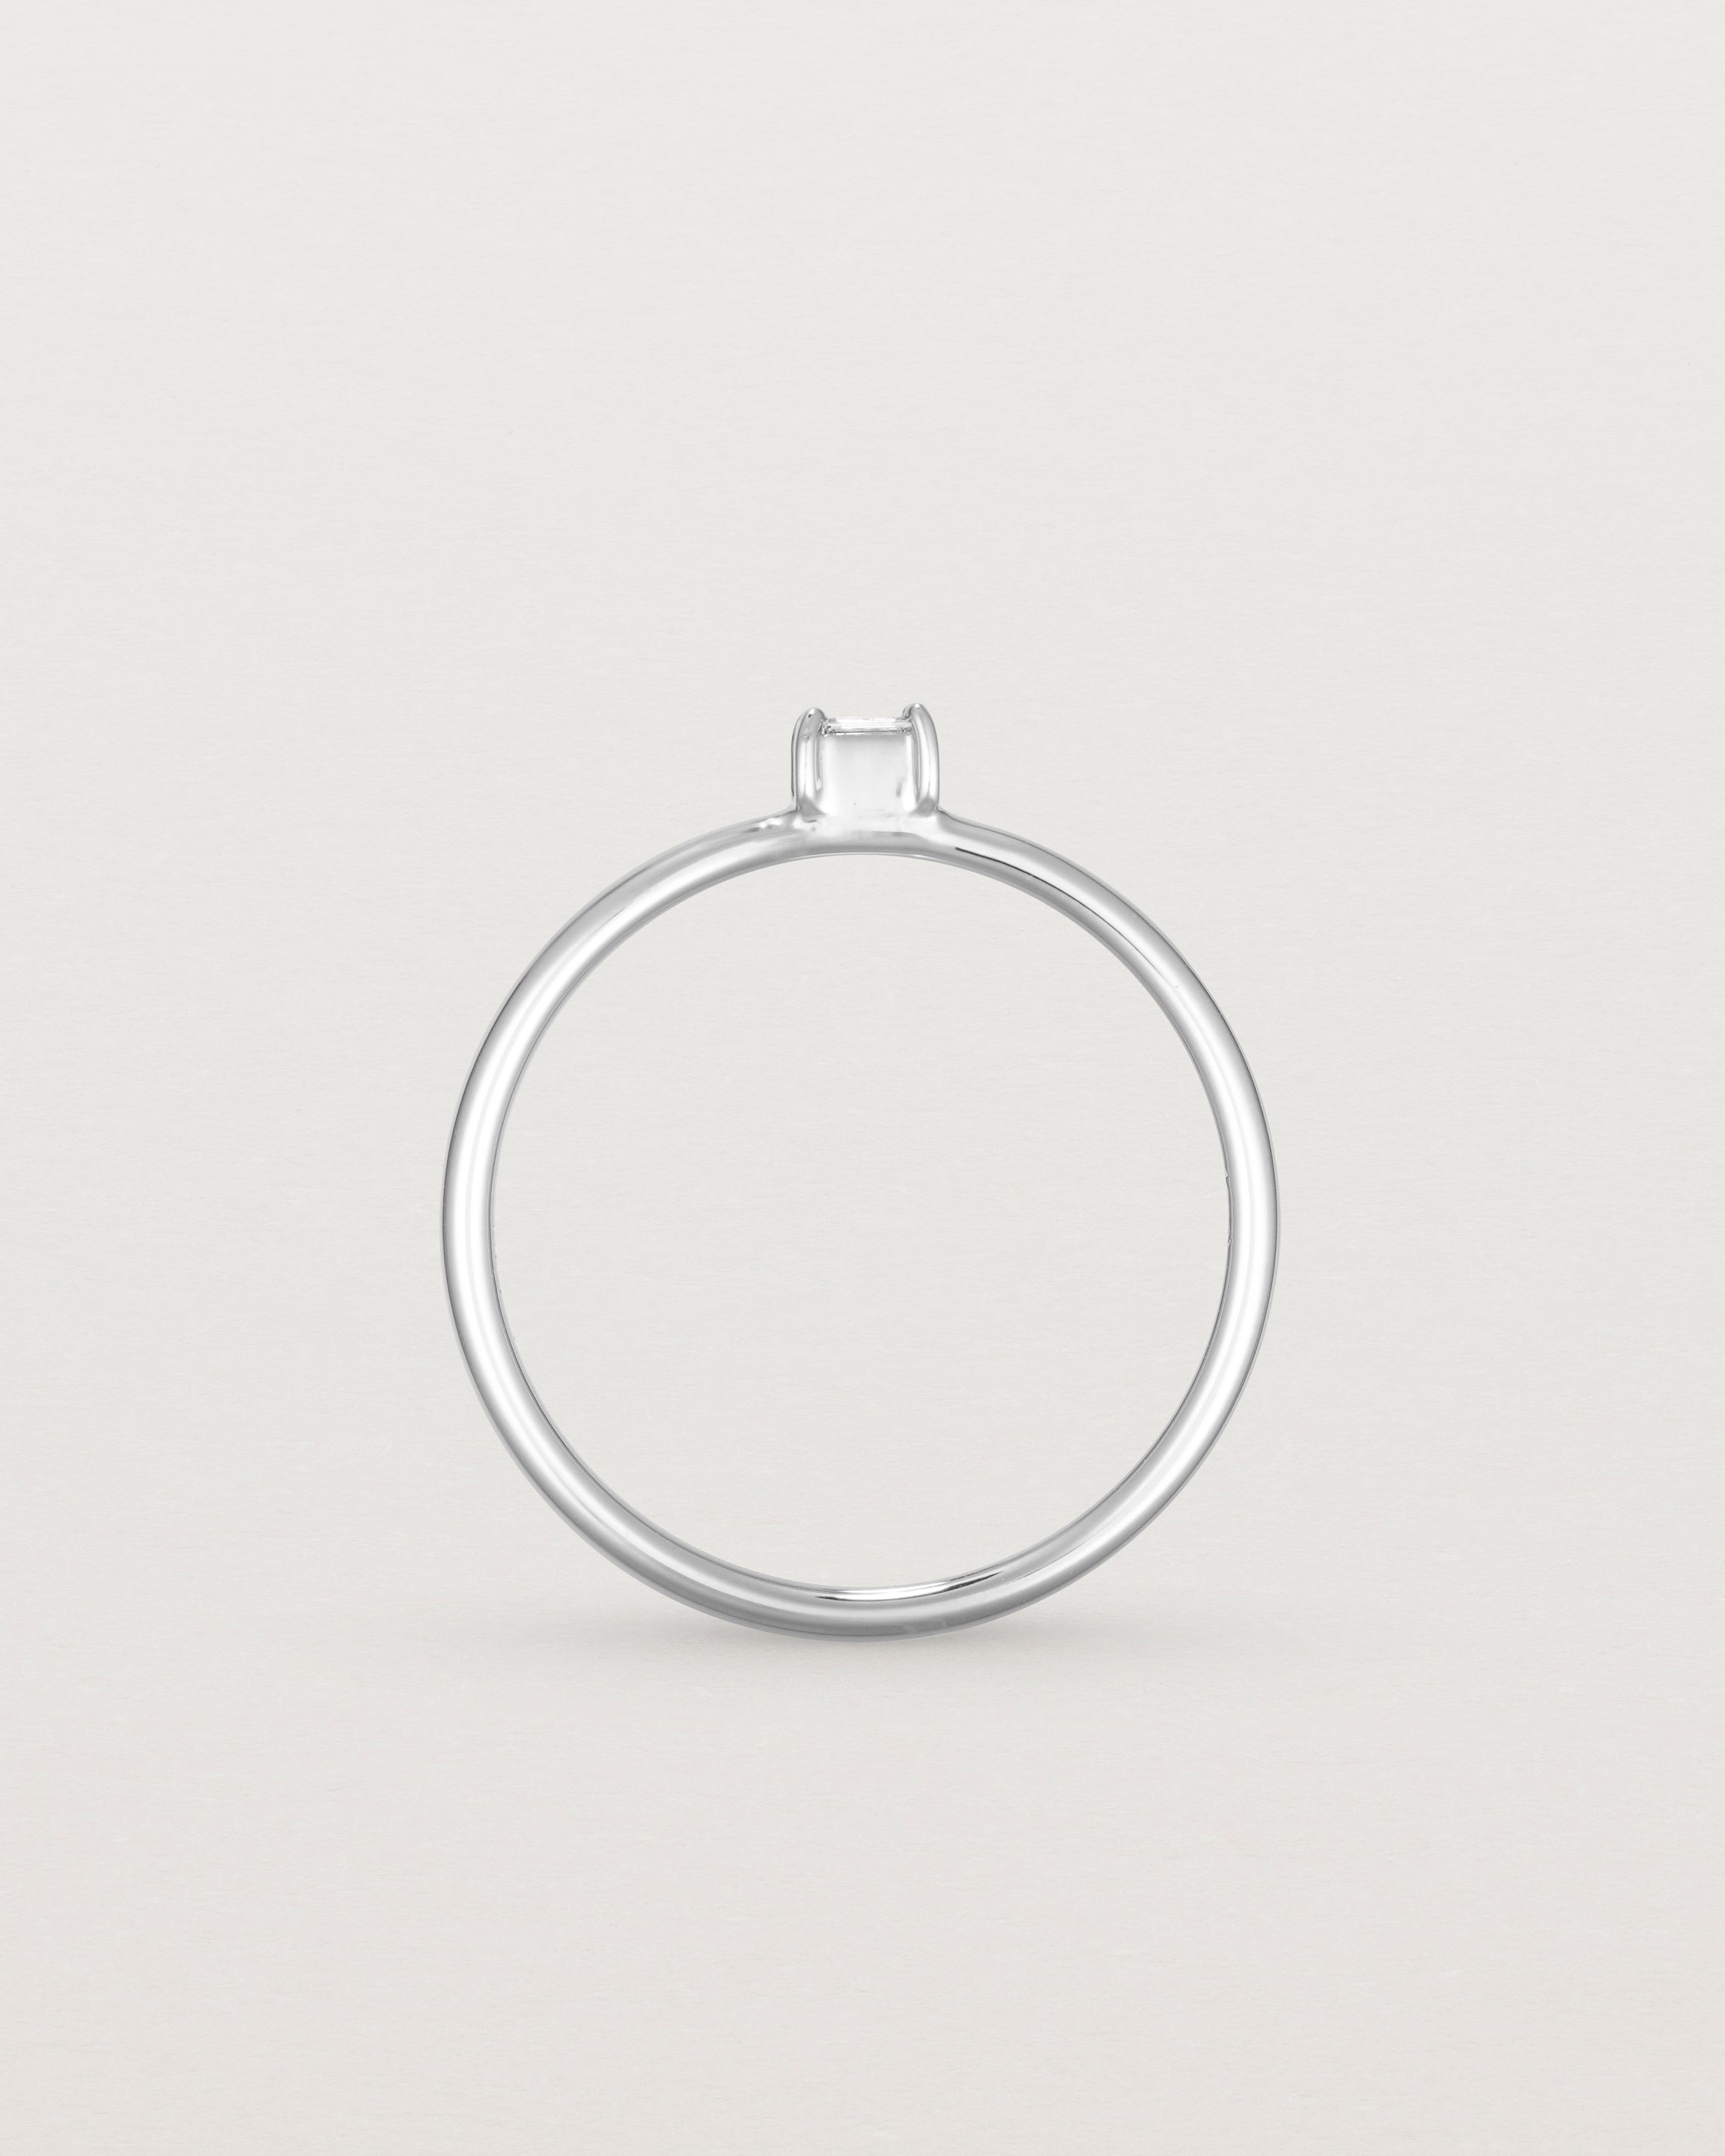 Standing view of the Sena Stacking Ring | Diamond in white gold.